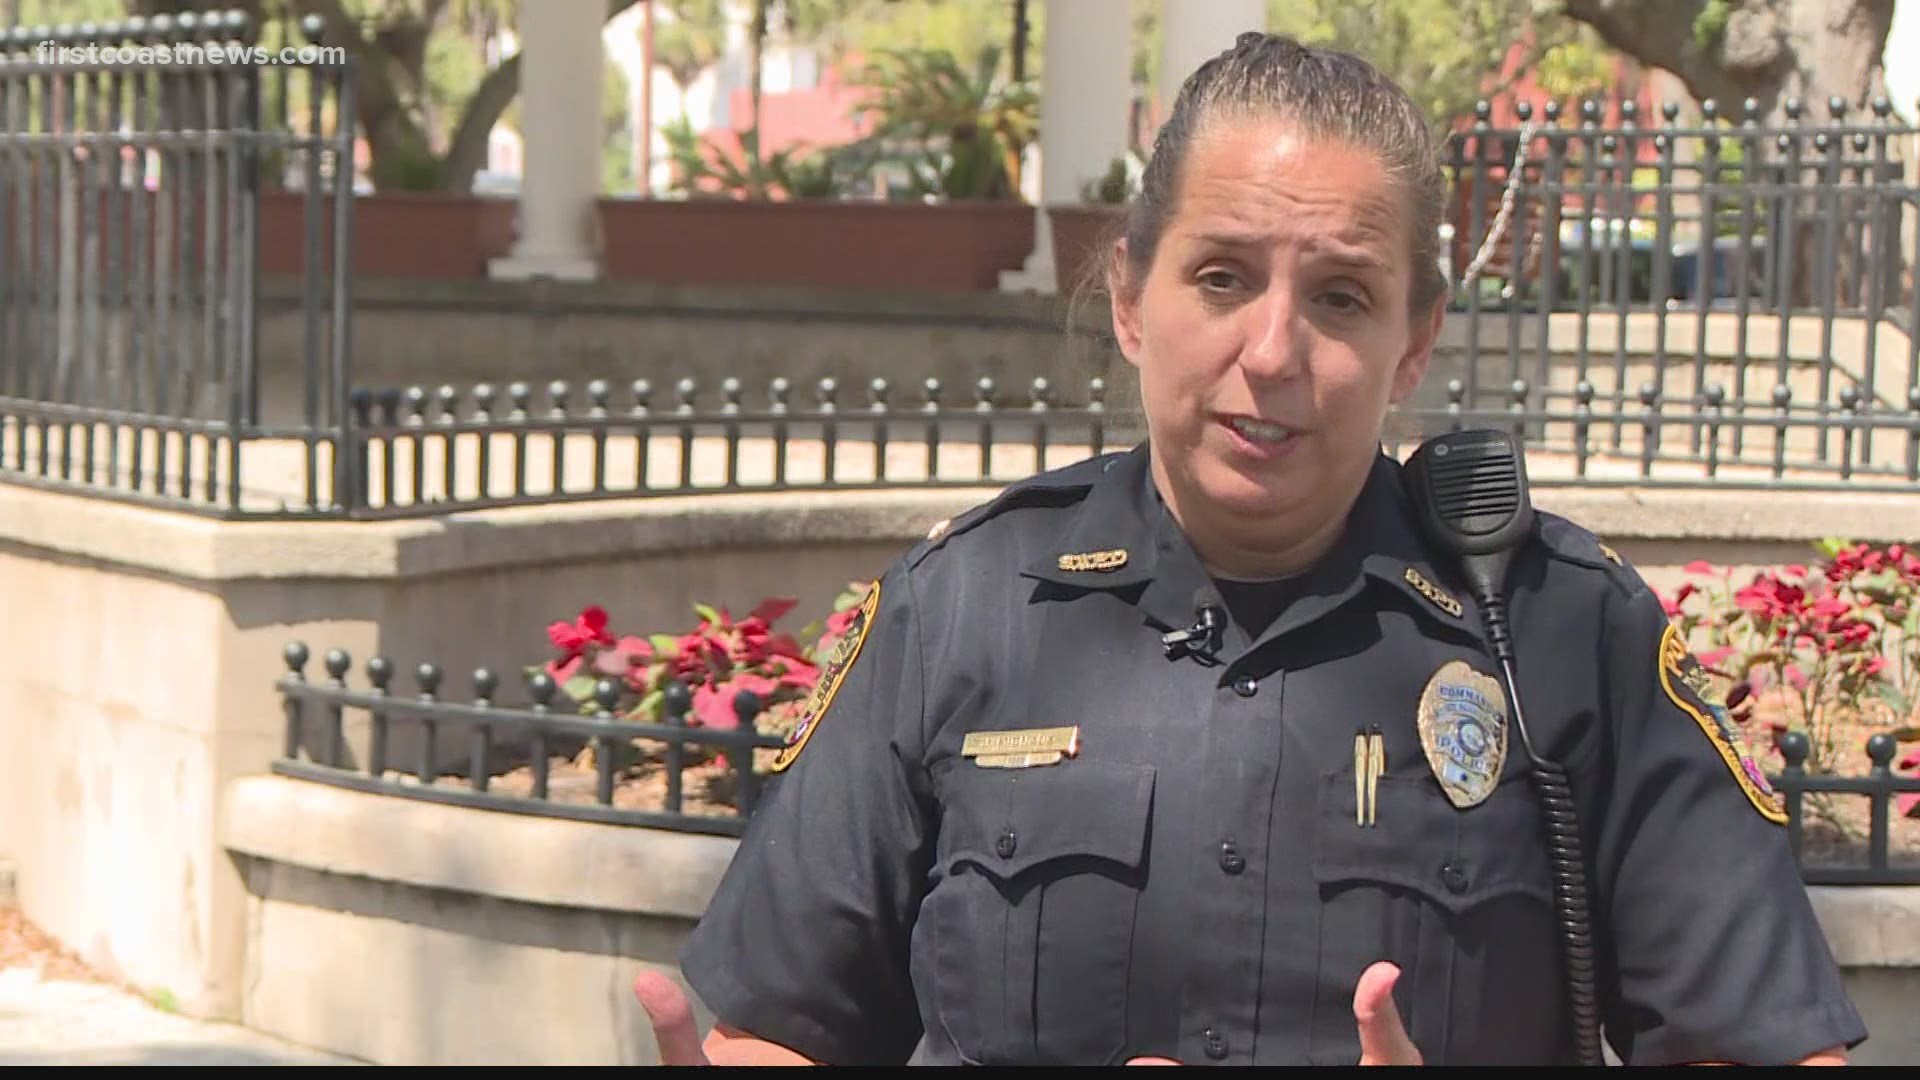 Jennifer Michaux will be the first female police chief in the history of St. Augustine.